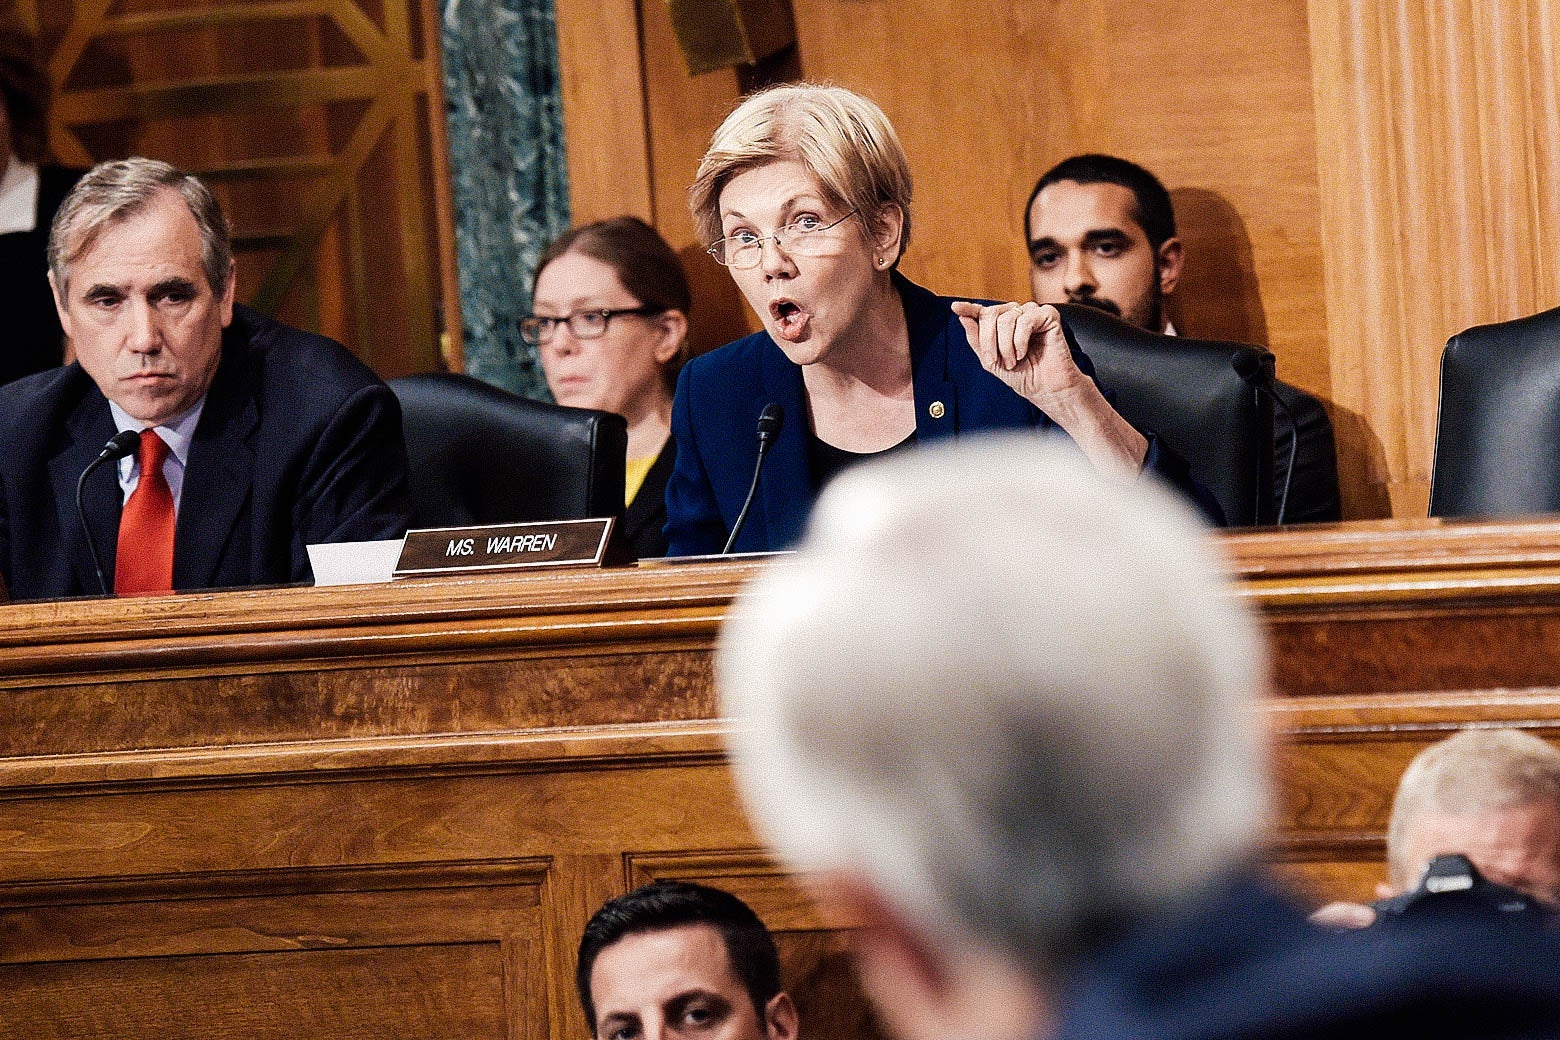 Elizabeth Warren, sitting at a panel while surrounded by others, speaks into a microphone.